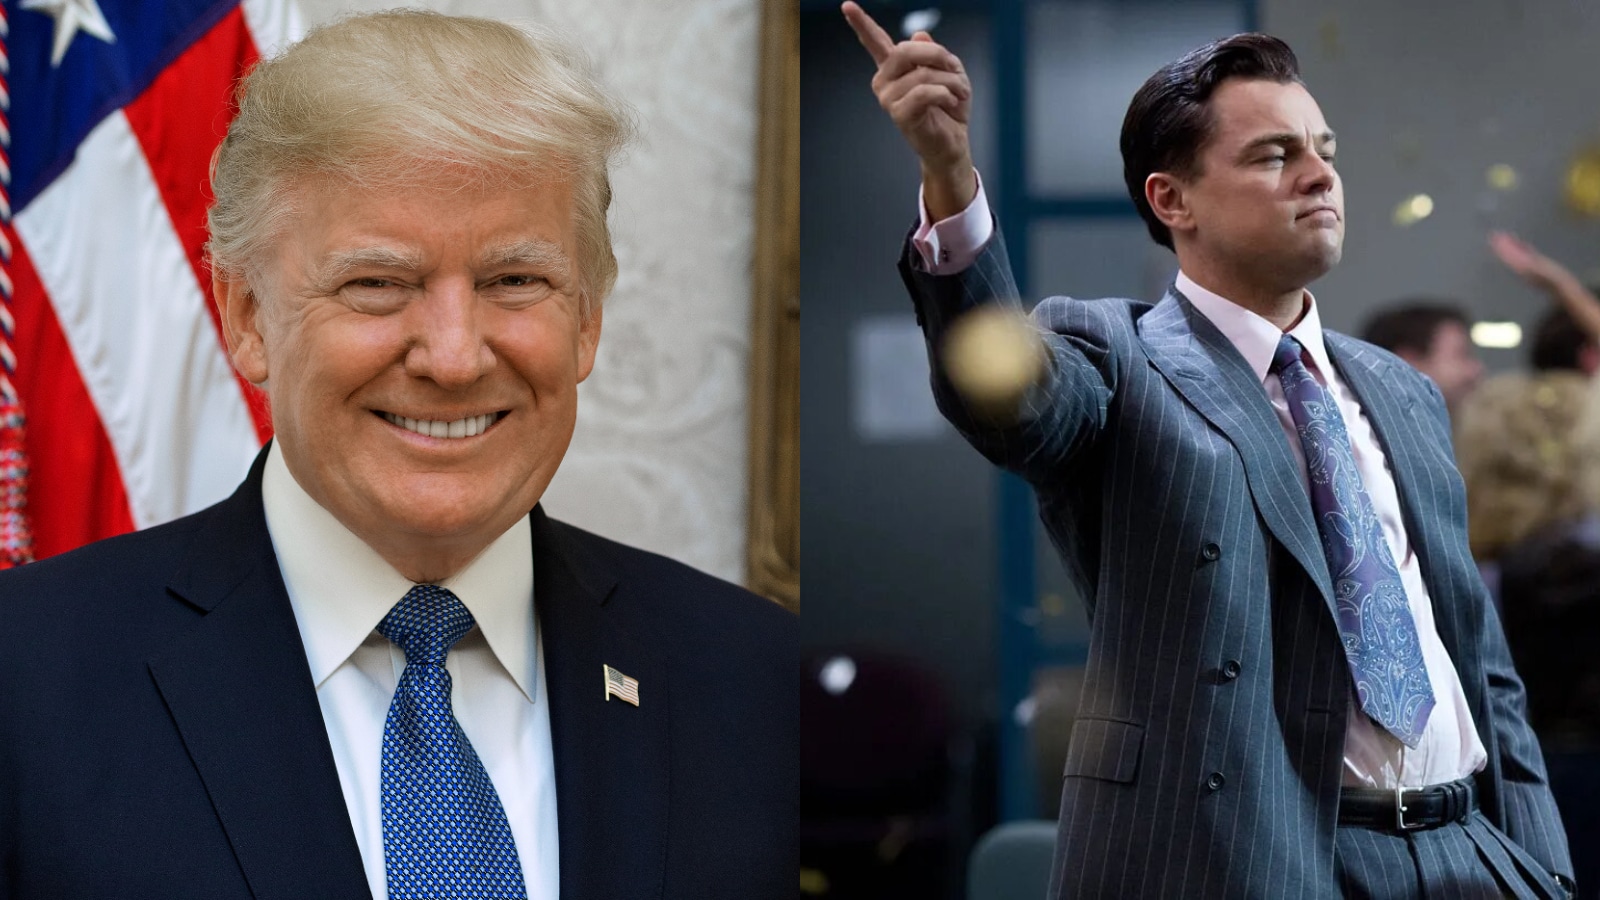 Donald Trump Crashed the 'Wolf of Wall Street' Set And Annoyed Everyone